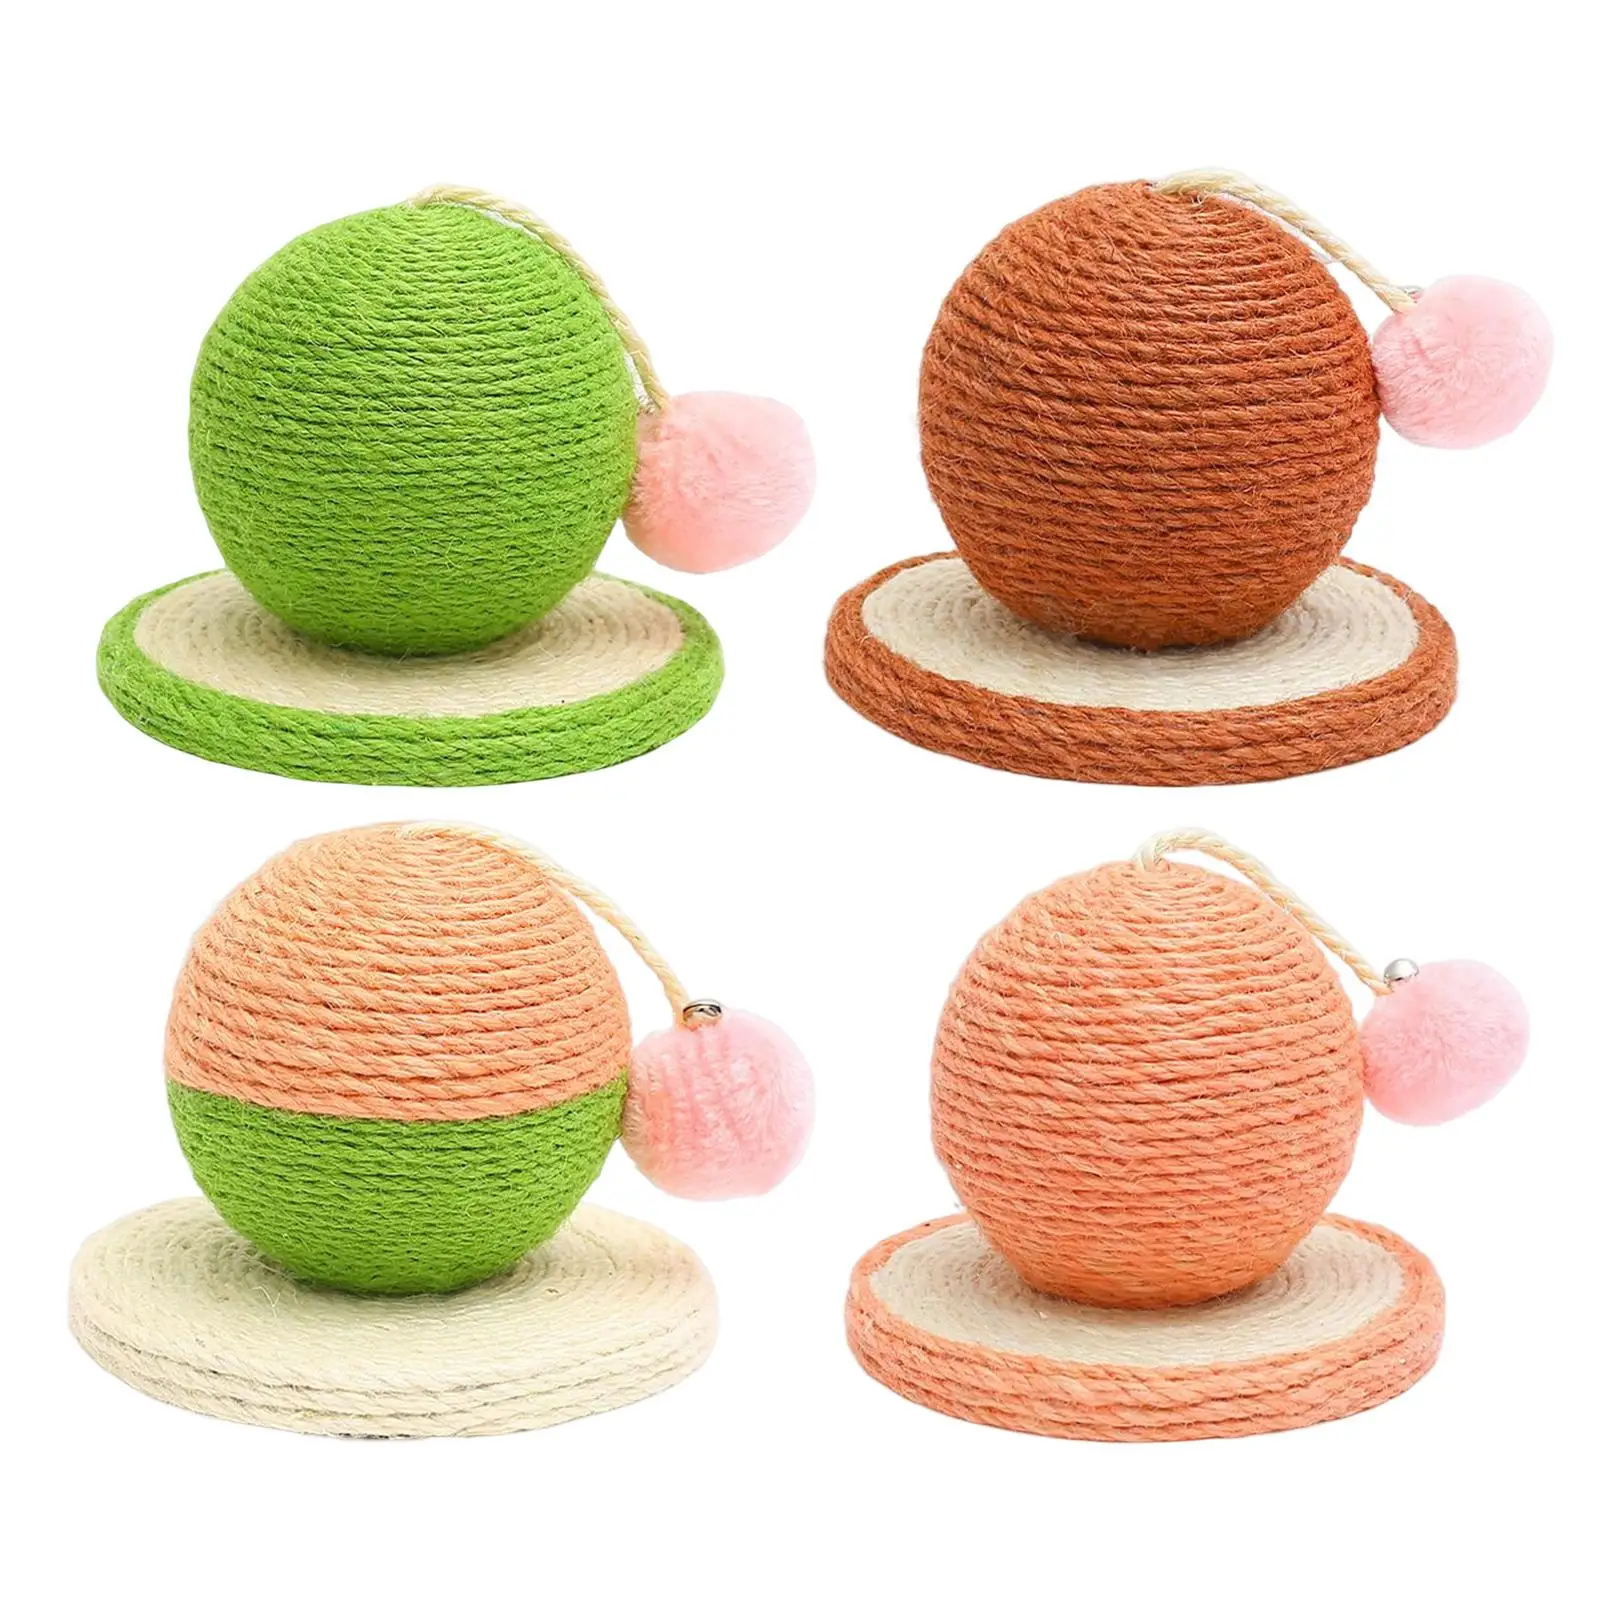 Cat Scratcher Ball Exercise Interactive Toy Claw Grinding Climbing Sisal Scratching Toy for Rest Training Indoor Cats Sleeping